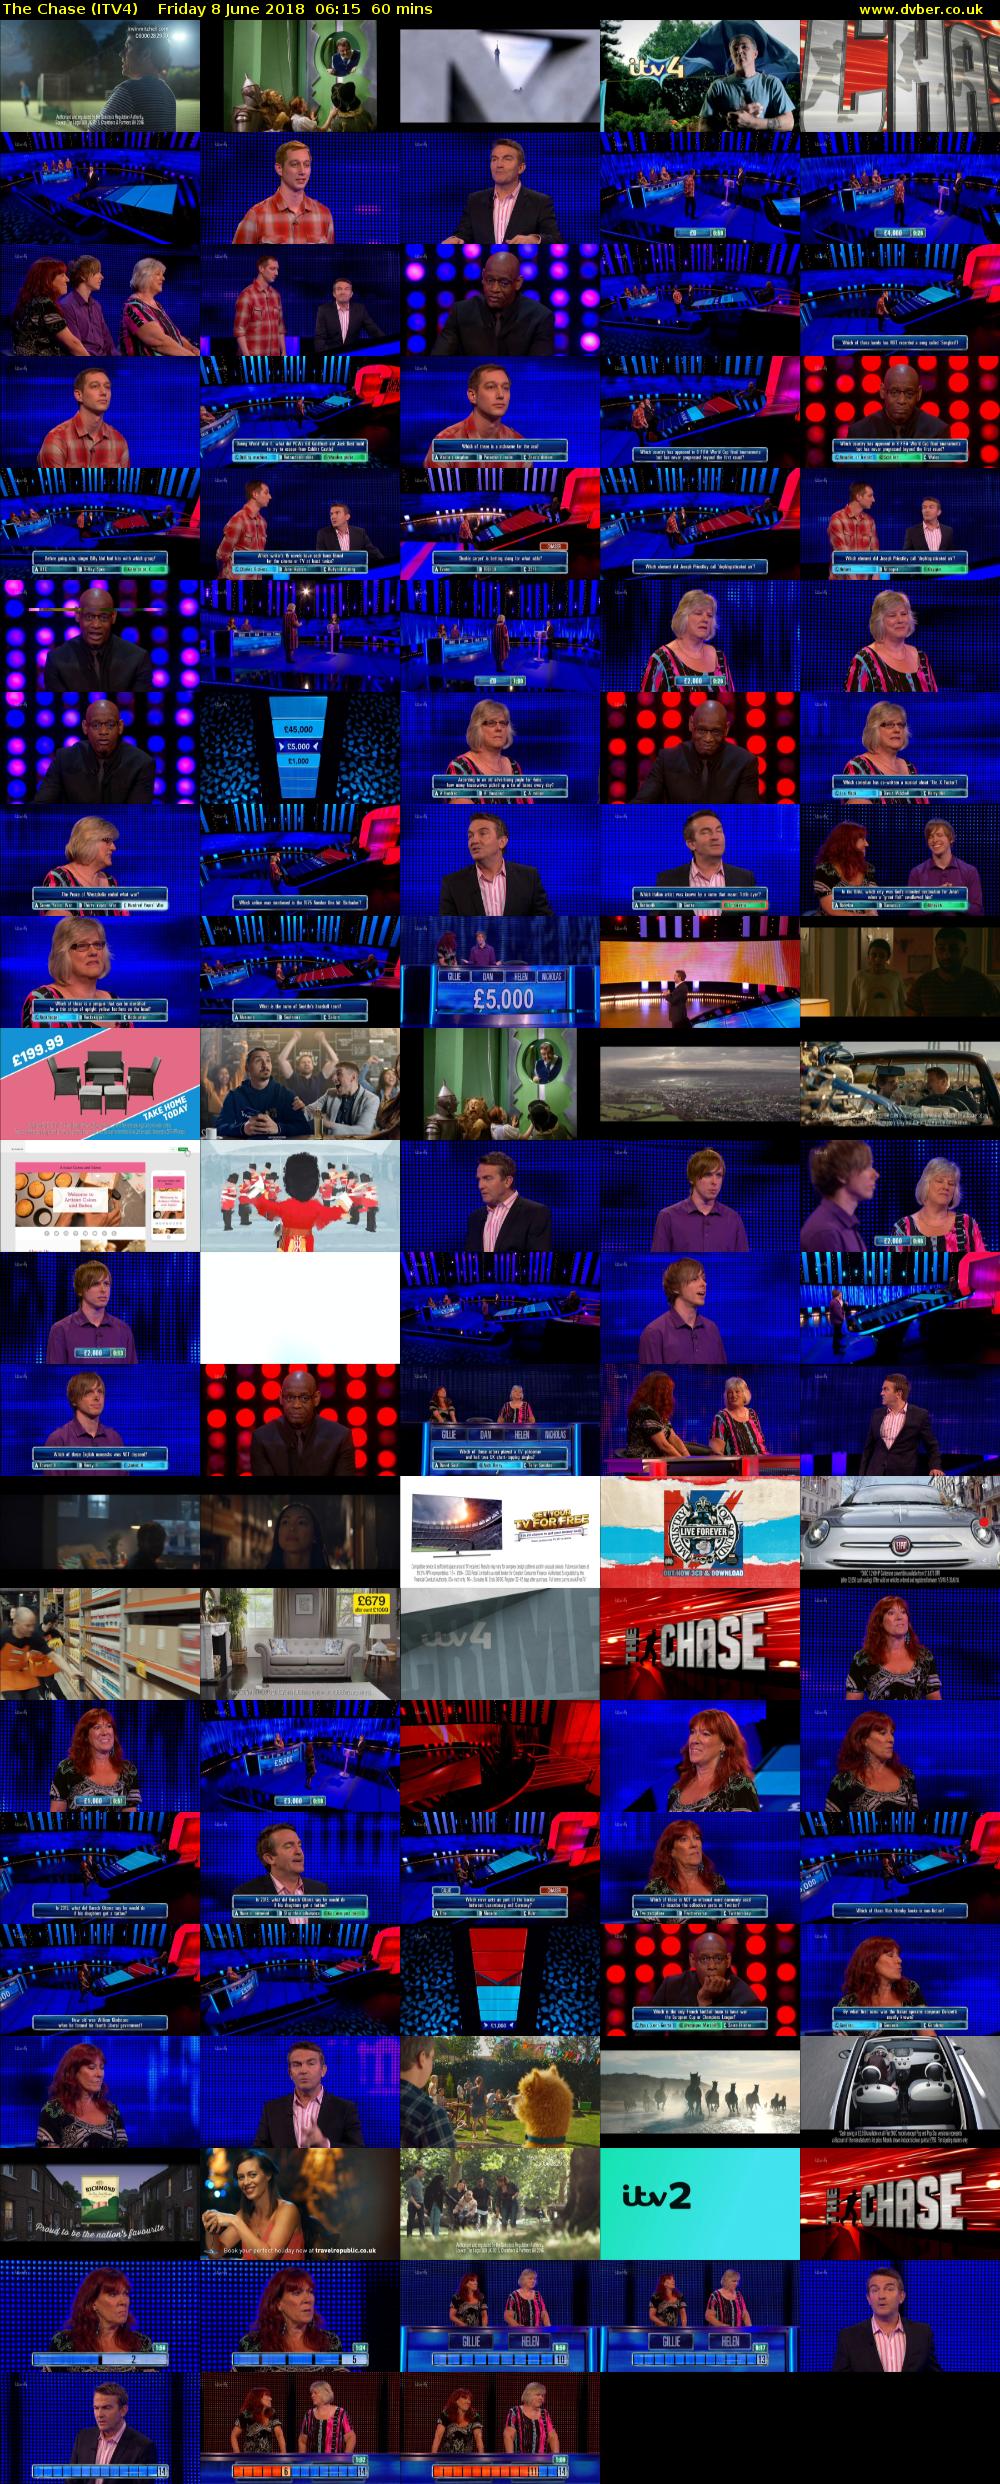 The Chase (ITV4) Friday 8 June 2018 06:15 - 07:15